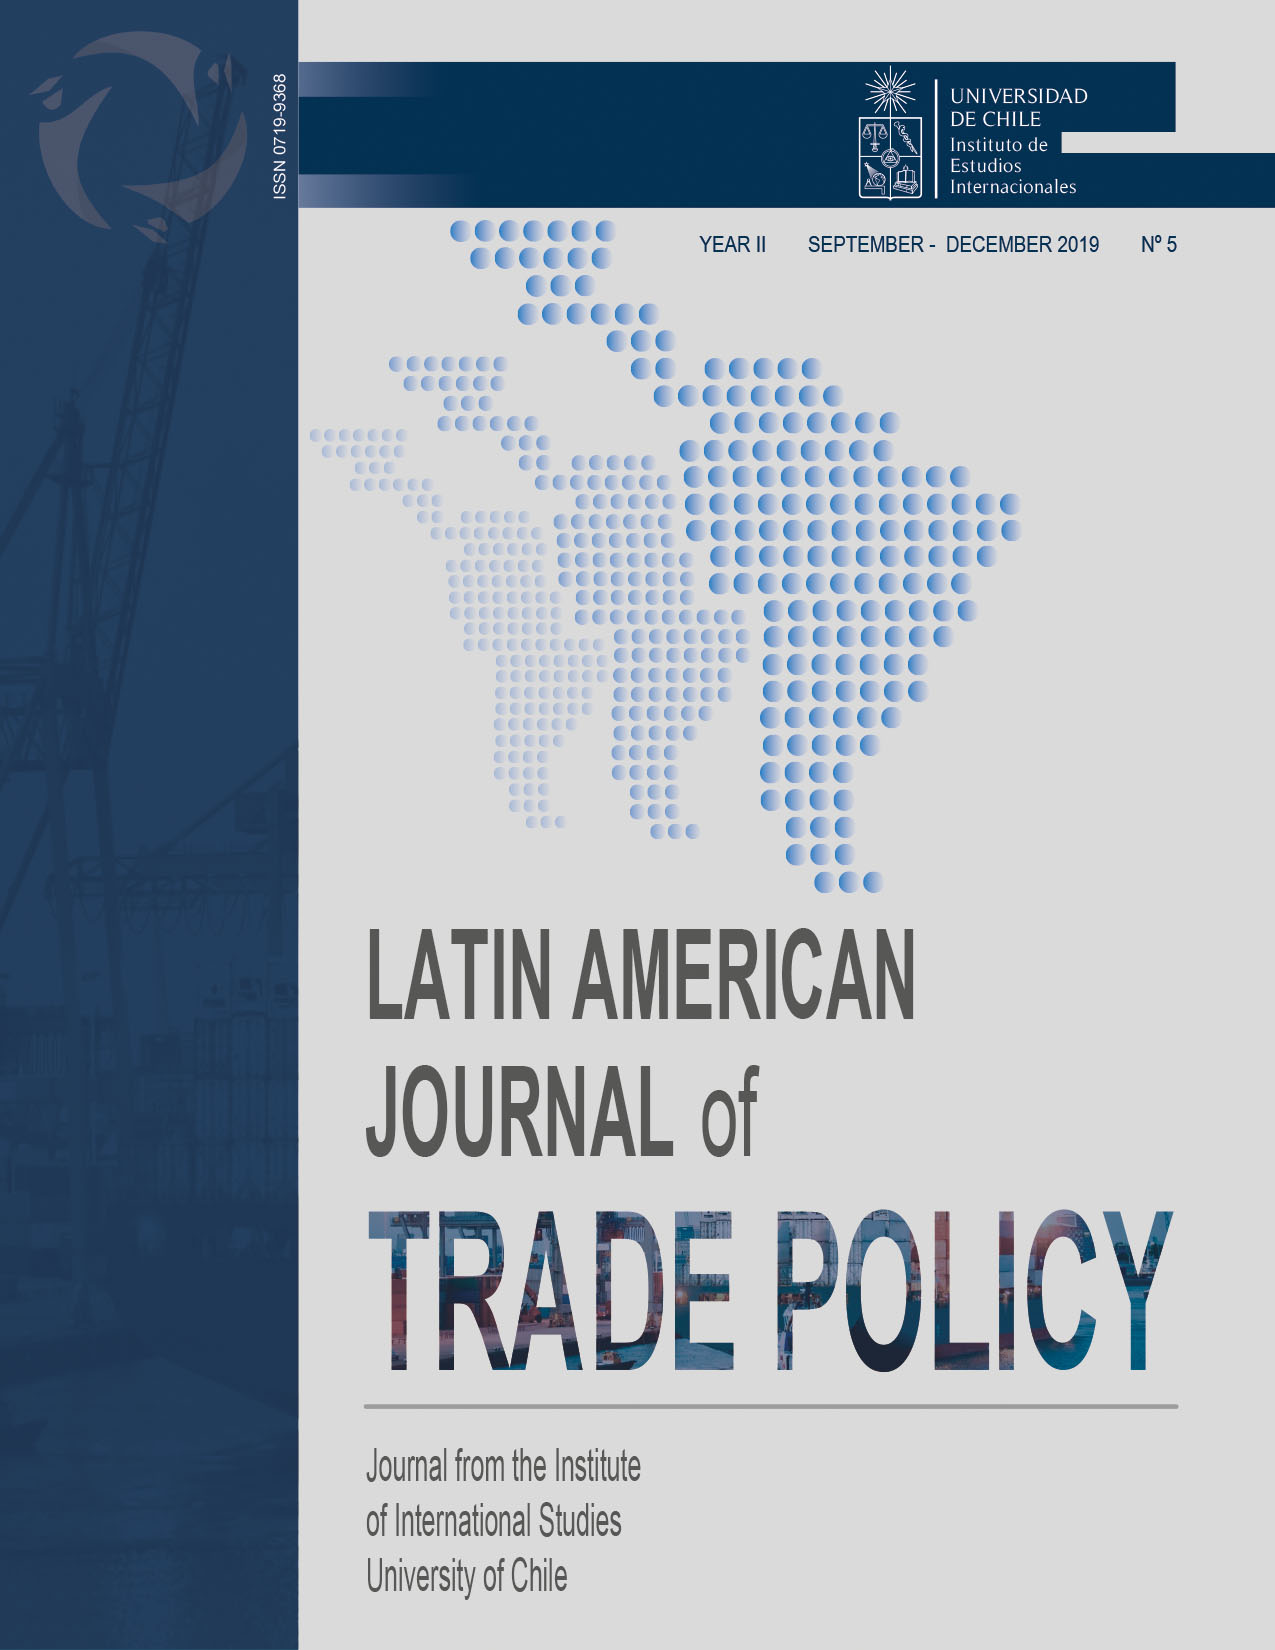 											Ver Vol. 2 Núm. 5 (2019): Latin American Journal of Trade Policy
										